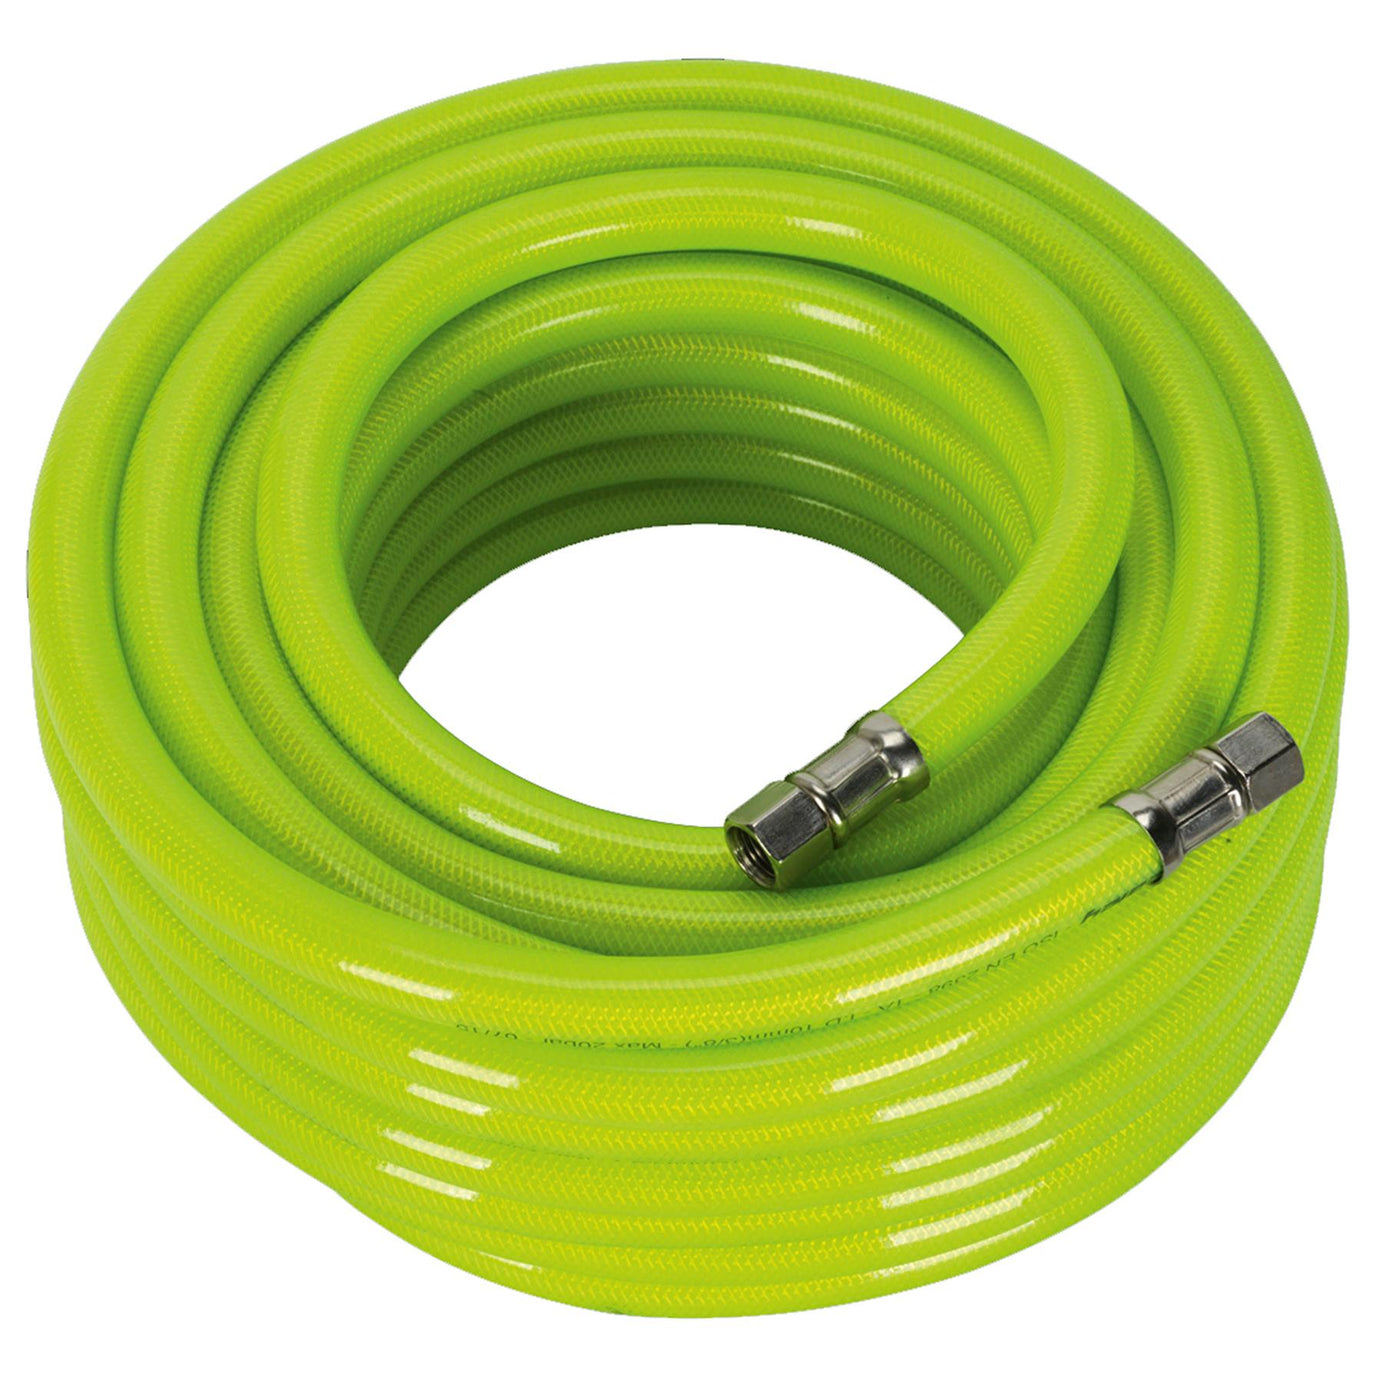 Sealey Air Hose High-Visibility 15m x 10mm with 1/4"BSP Unions